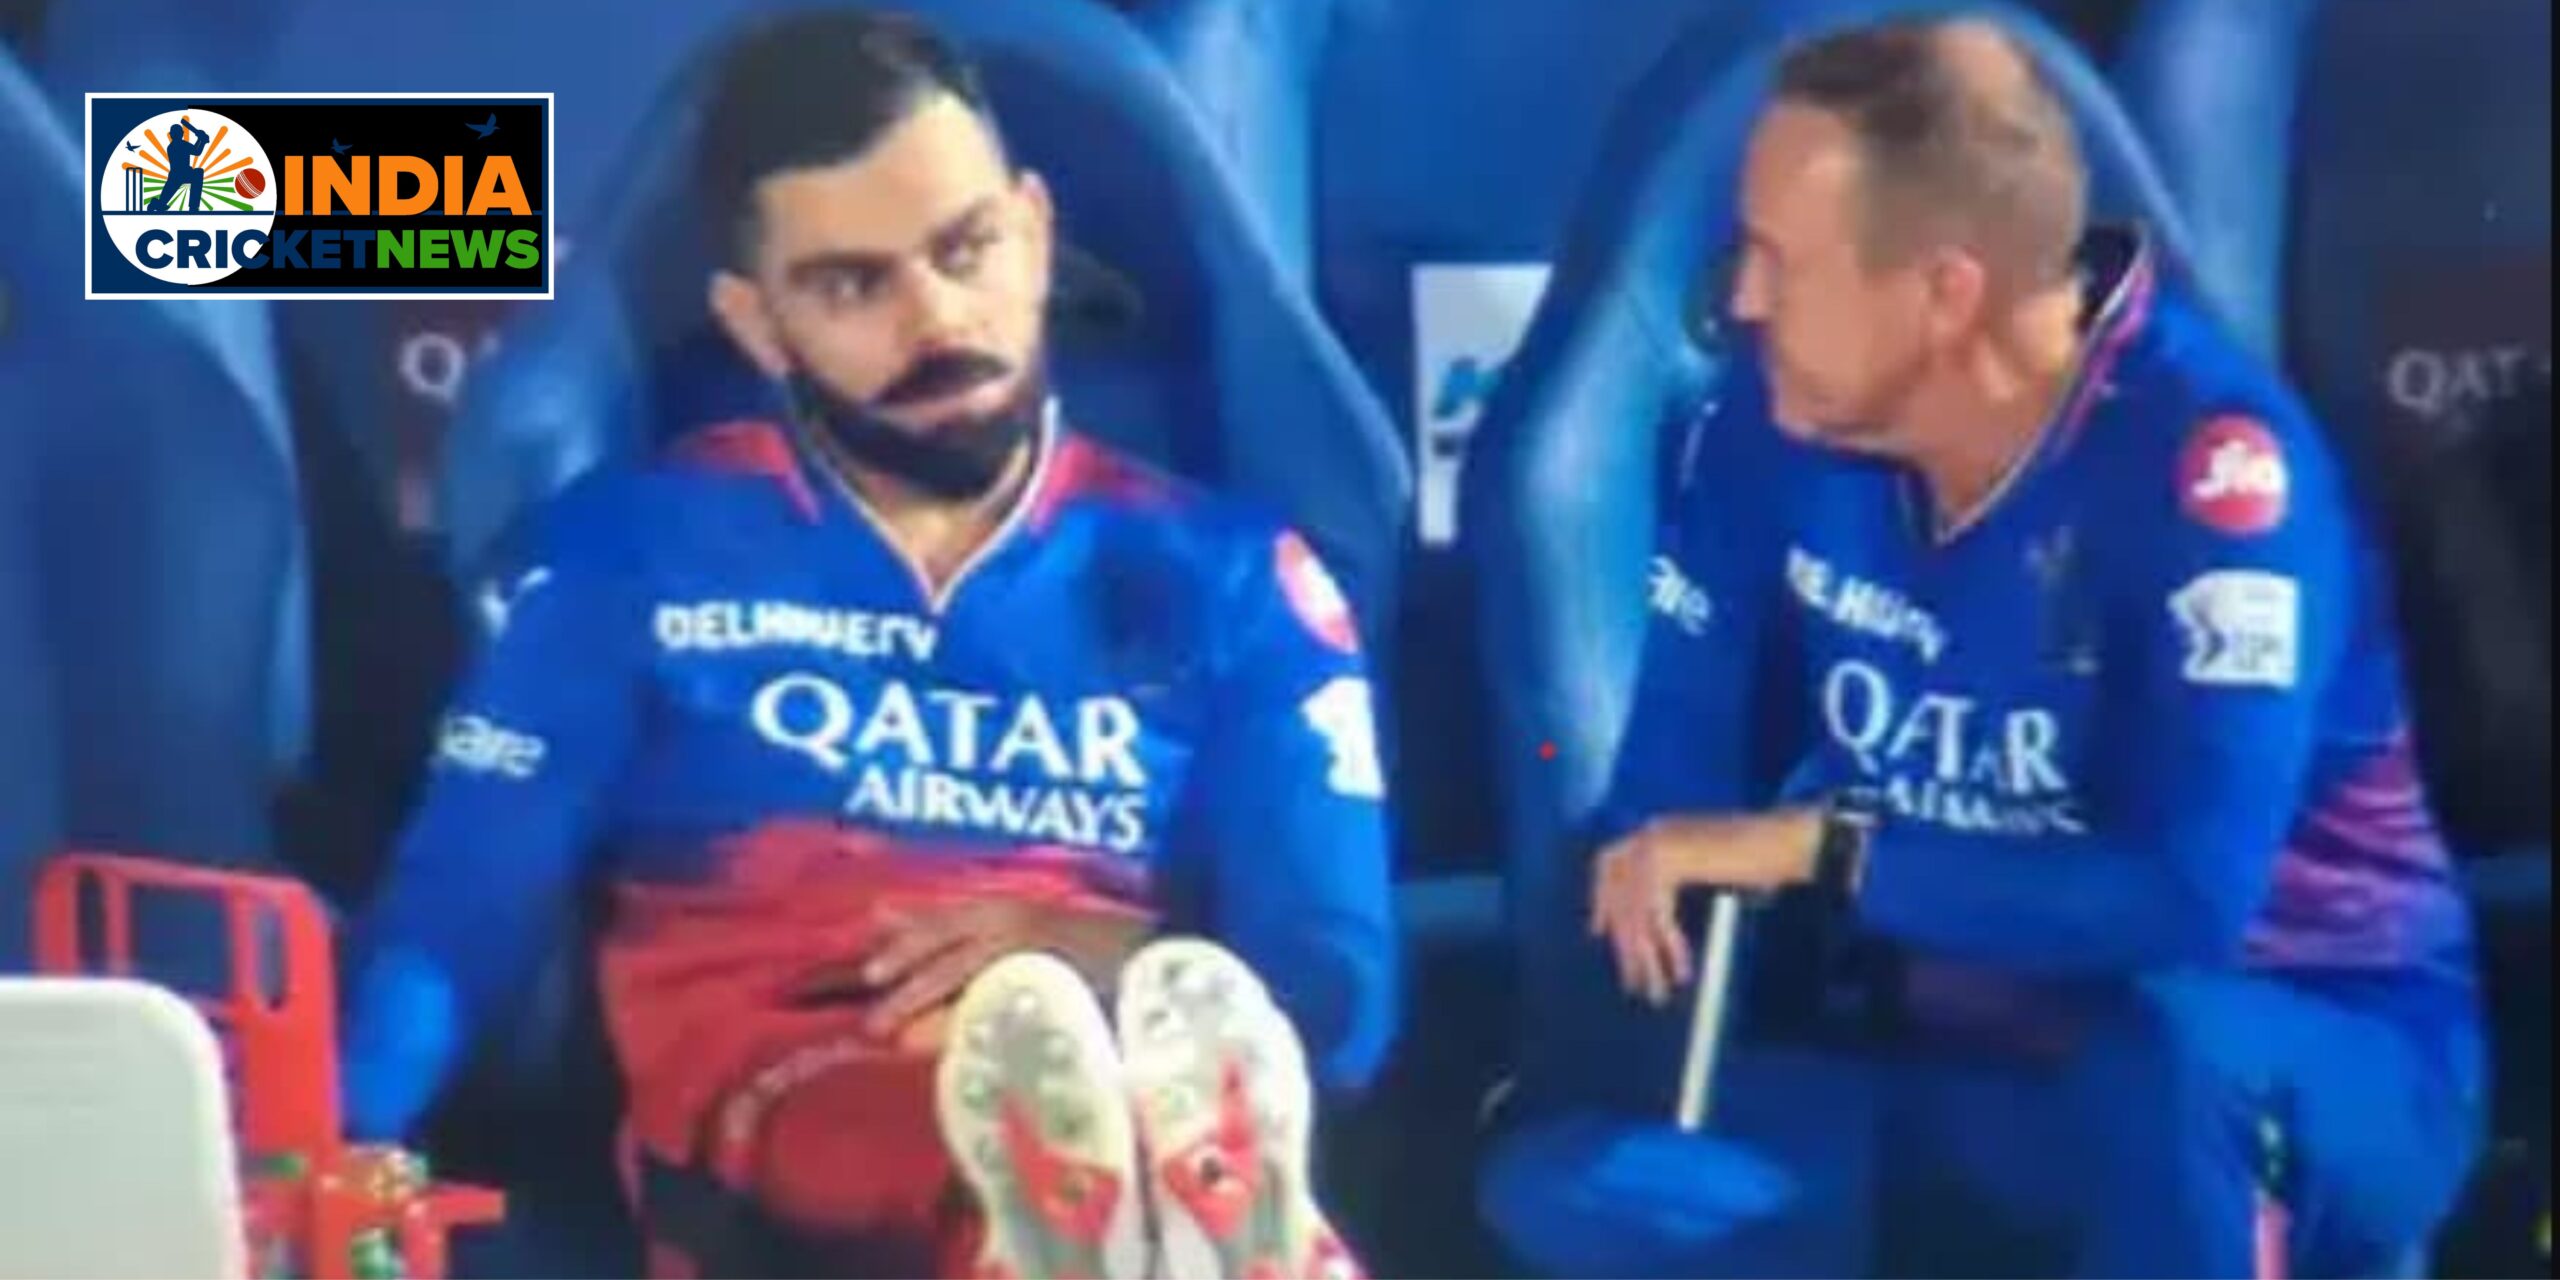 Watch RCB icon Virat Kohli getting angry with a fielding effort |